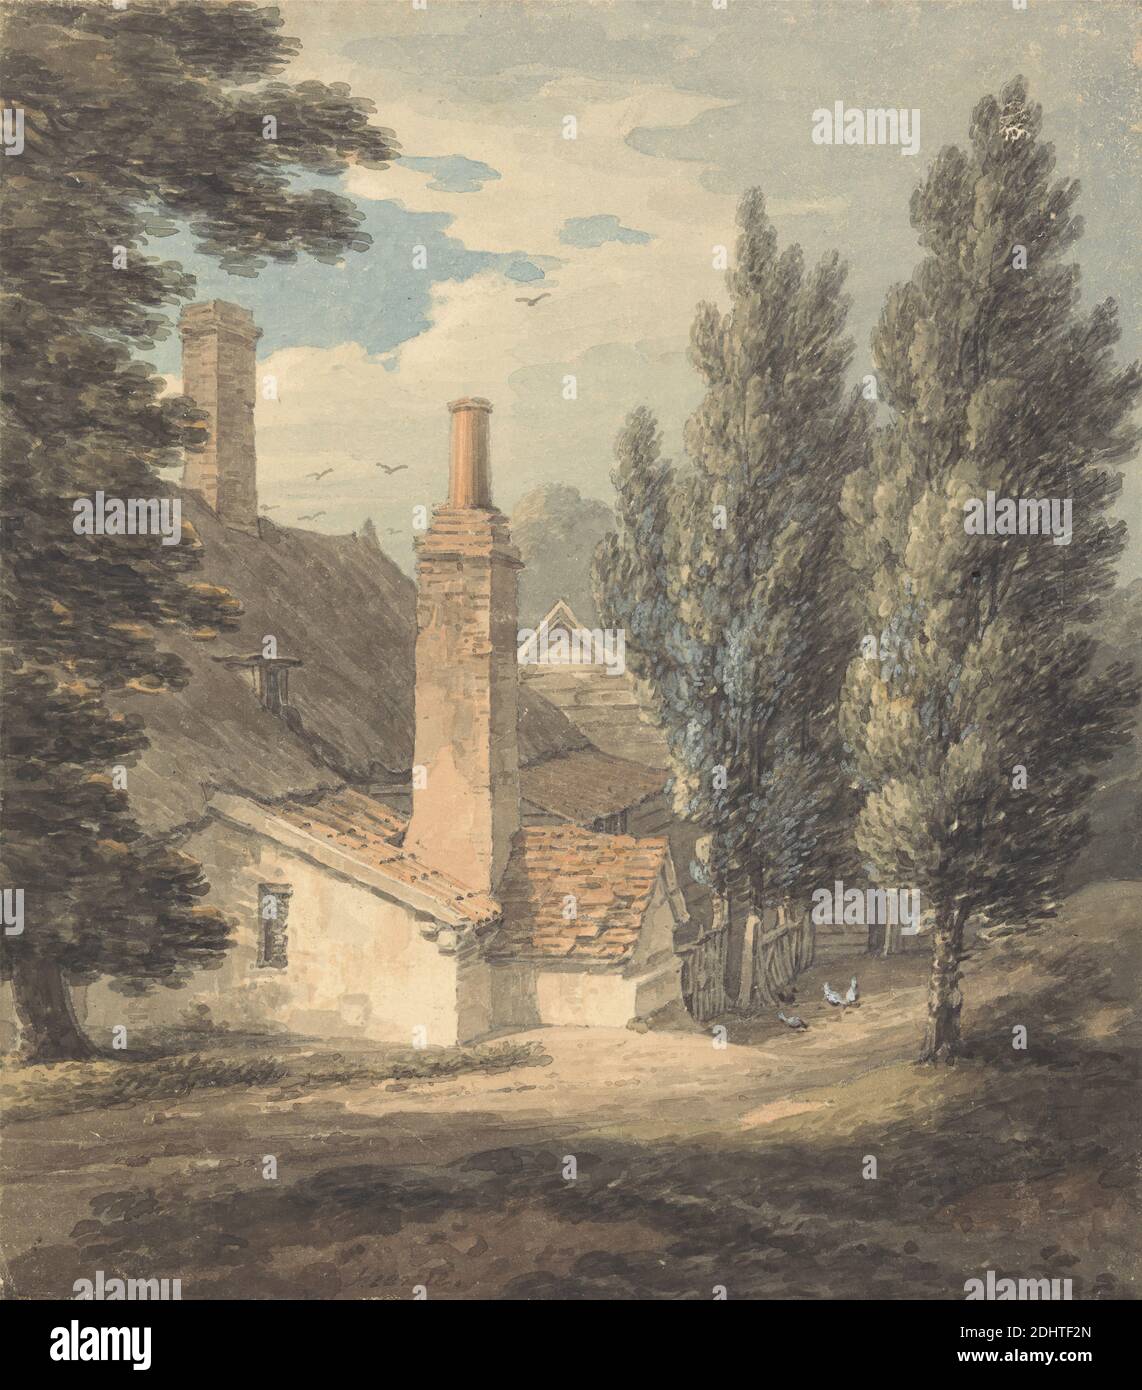 The Back of a Farm House, Thomas Hearne, 1744–1817, British, undated, Watercolor and gouache over graphite on moderately thick, slightly textured, cream wove paper, Sheet: 8 x 7 inches (20.3 x 17.8 cm), agriculture, architectural subject, birds, chickens, chimneys, farm, farmhouse, fences, grass, hill, landscape, trees Stock Photo